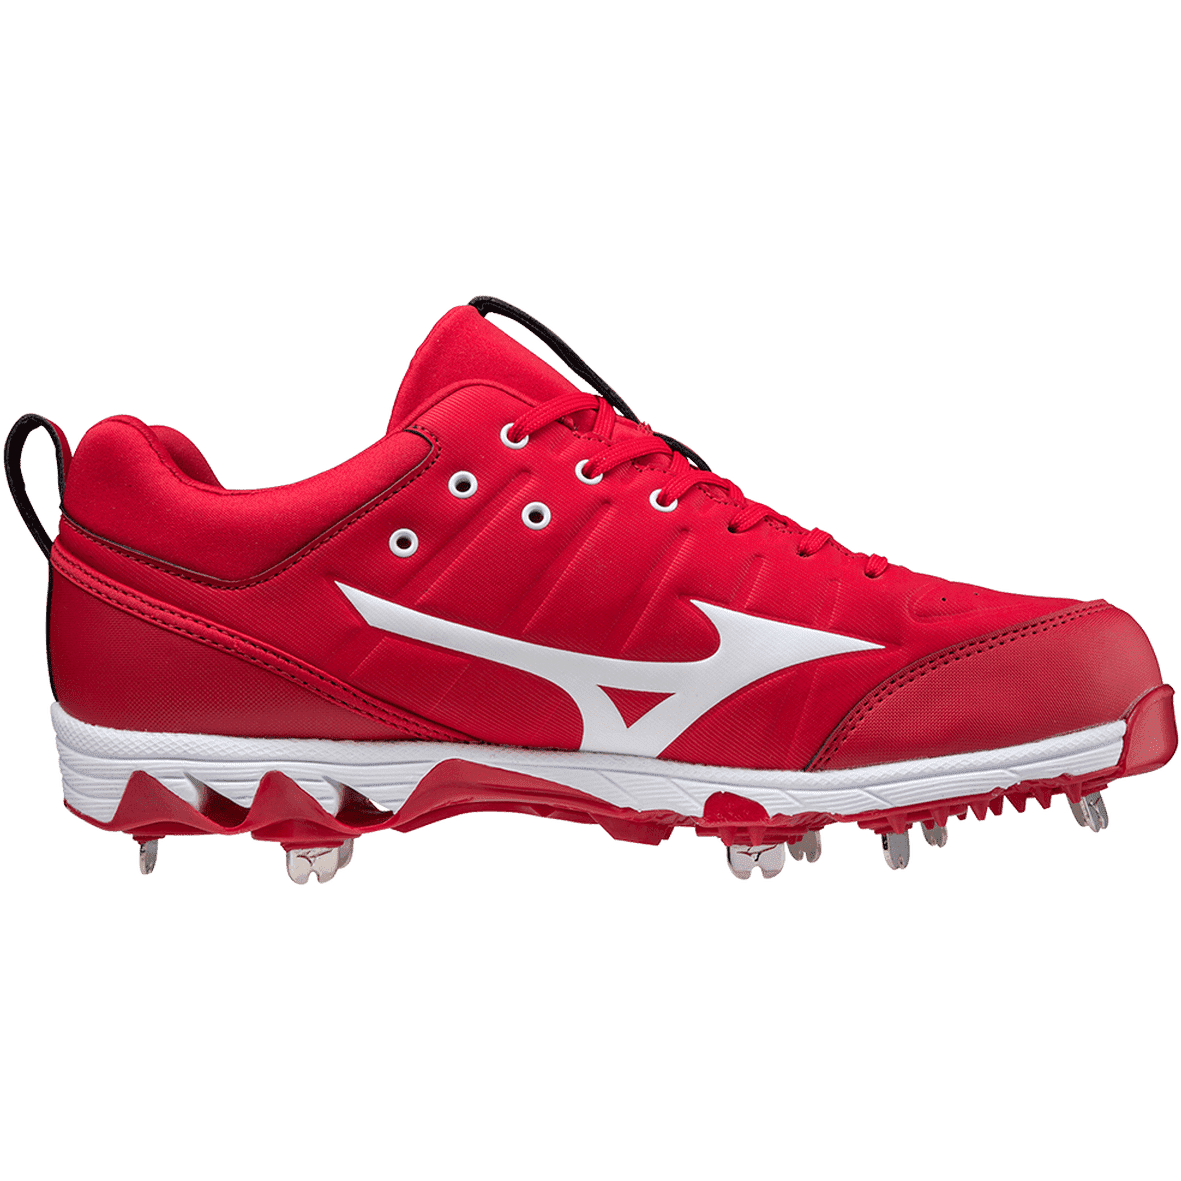 Mizuno 9-Spike Ambition 2 Low Men's Metal Baseball Cleat - Red White